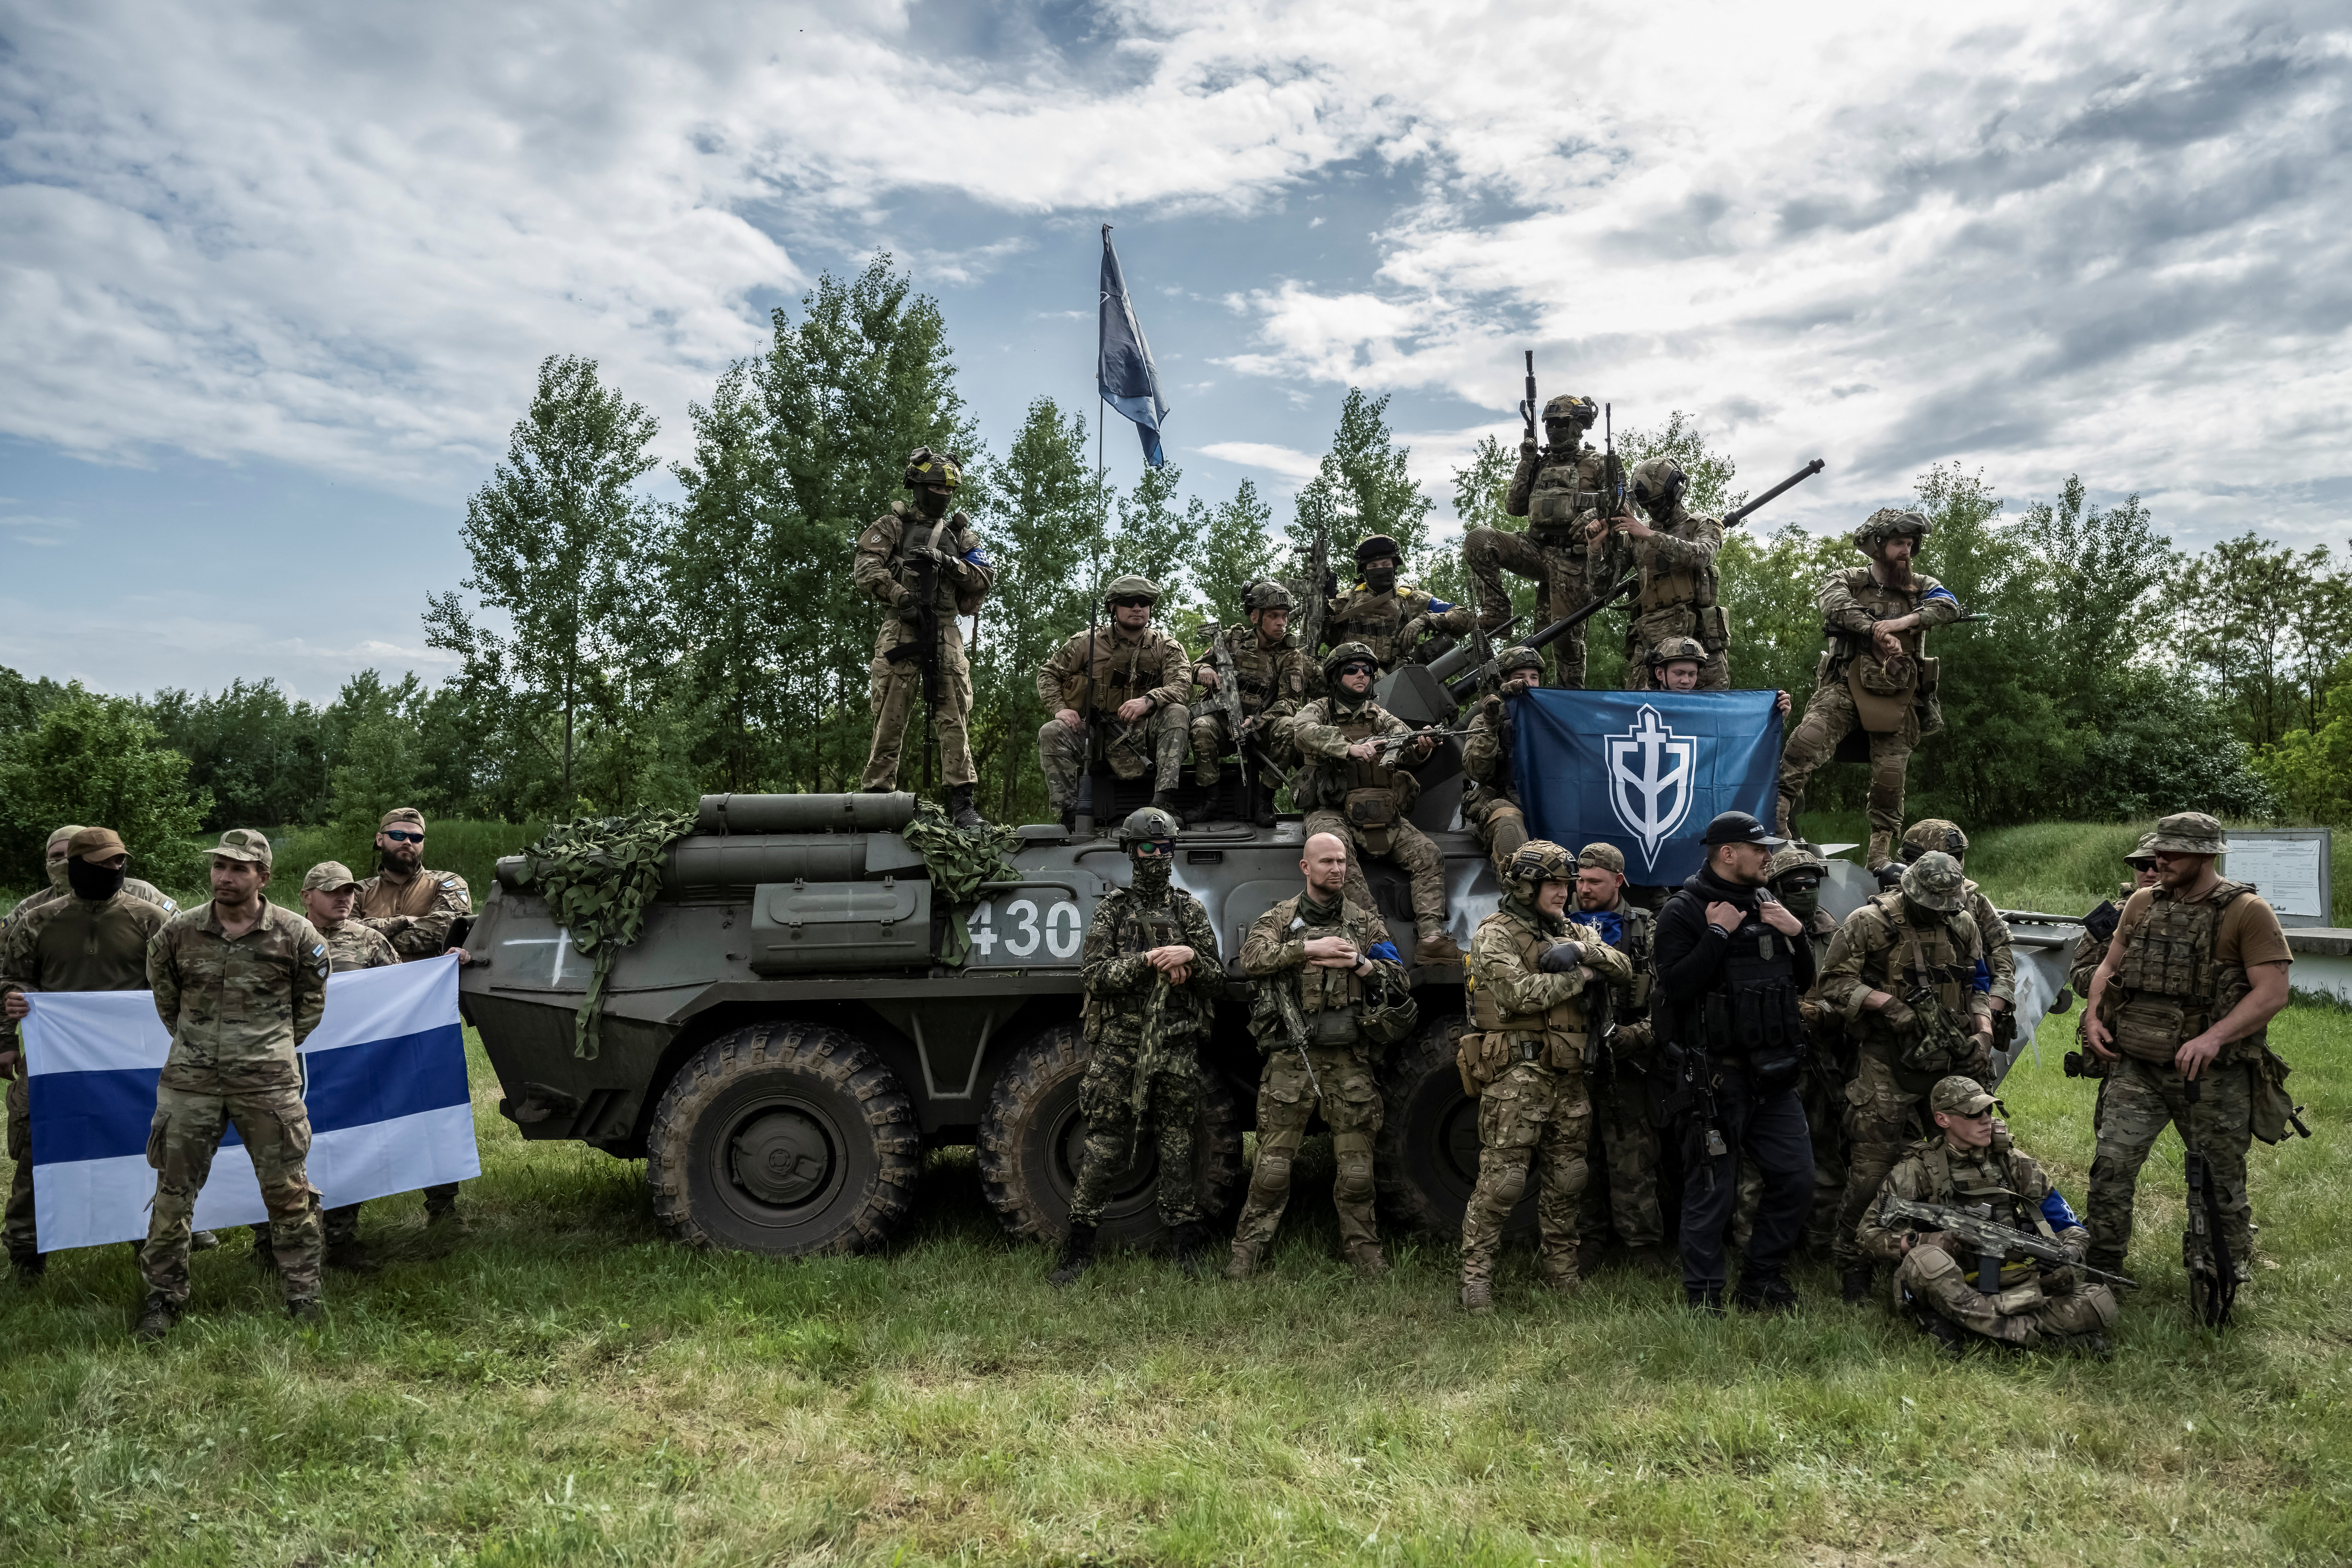 Members of the Russian Volunteer Corps are seen, amid Russia's attack on Ukraine, near the Russian border, in Ukraine May 24, 2023. REUTERS/Viacheslav Ratynskyi